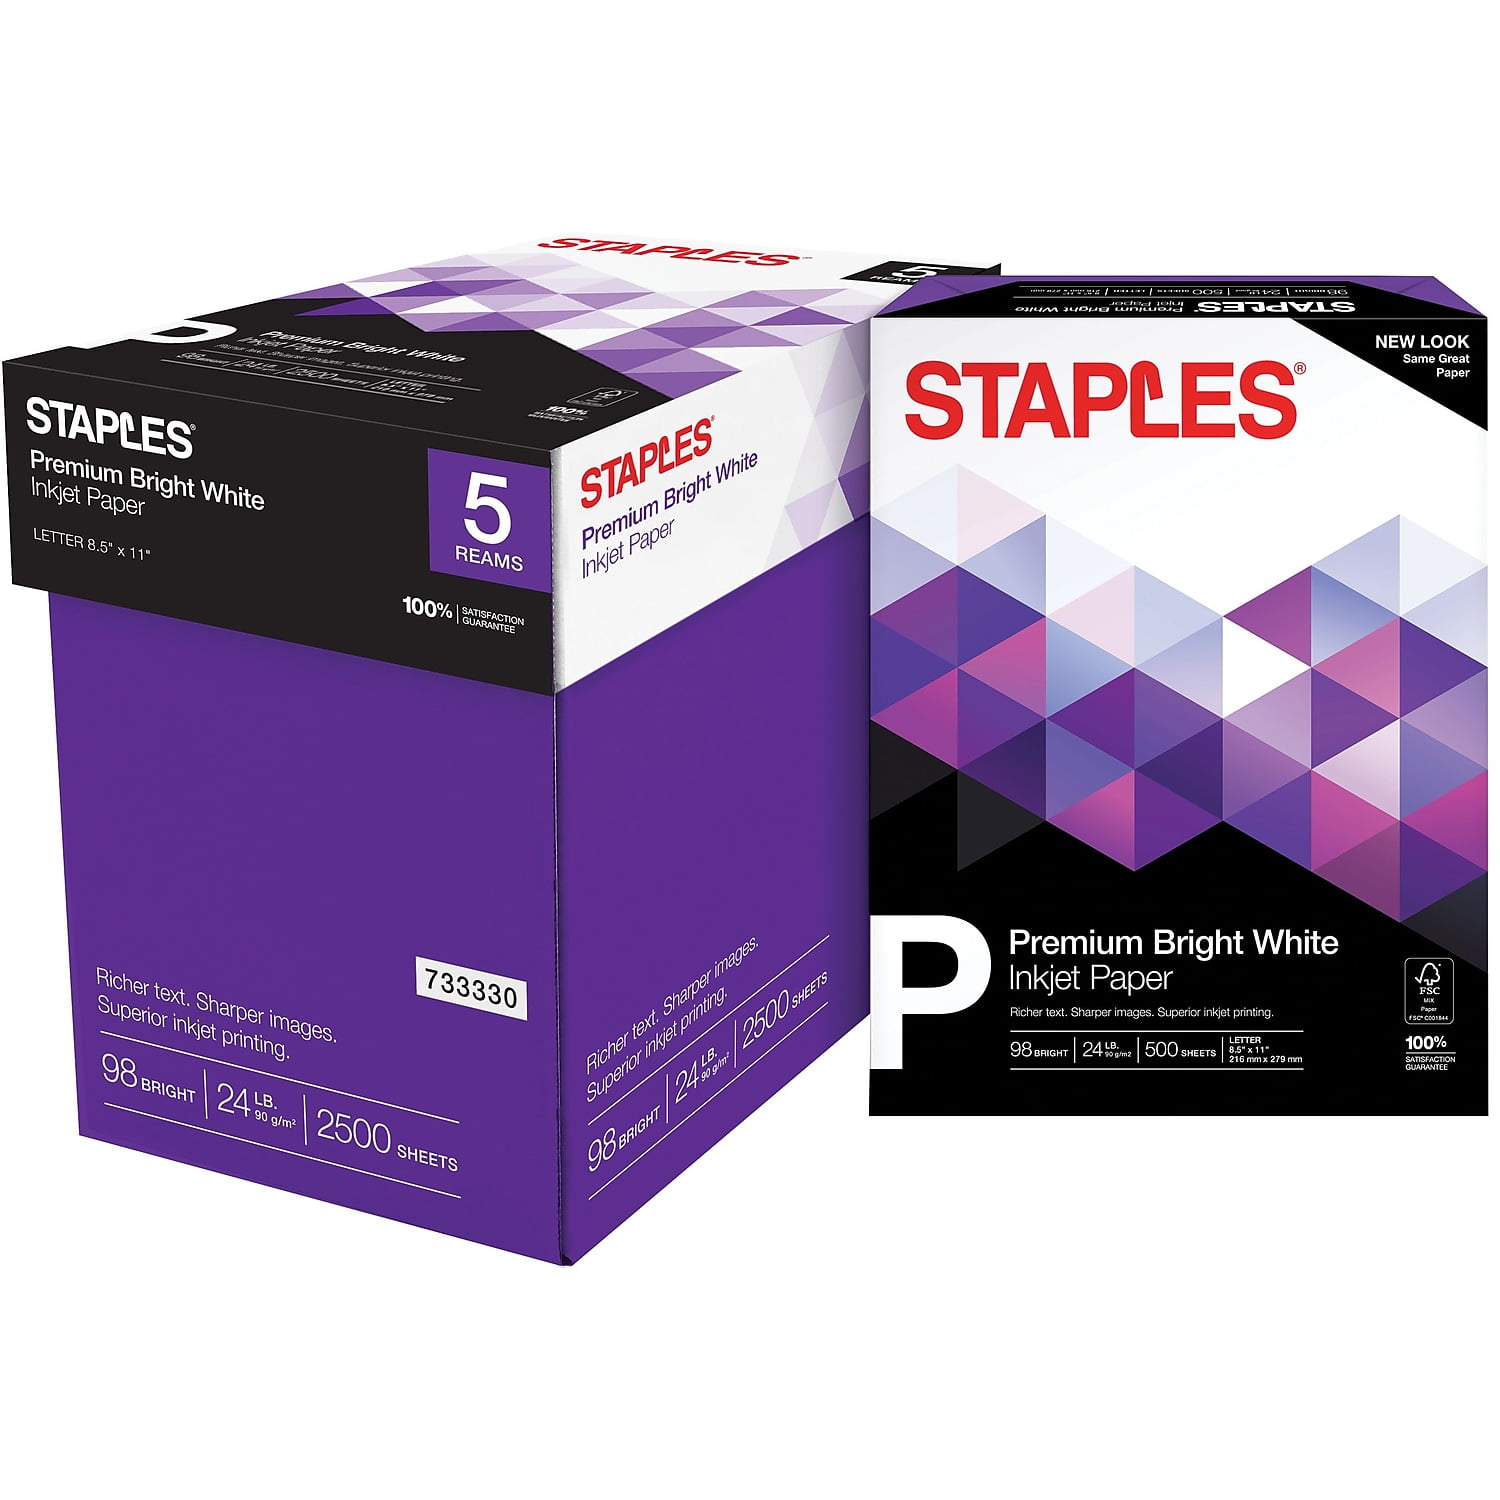 Staples Brights Multipurpose Paper, 24 lbs., 8.5 x 11, Red, 500